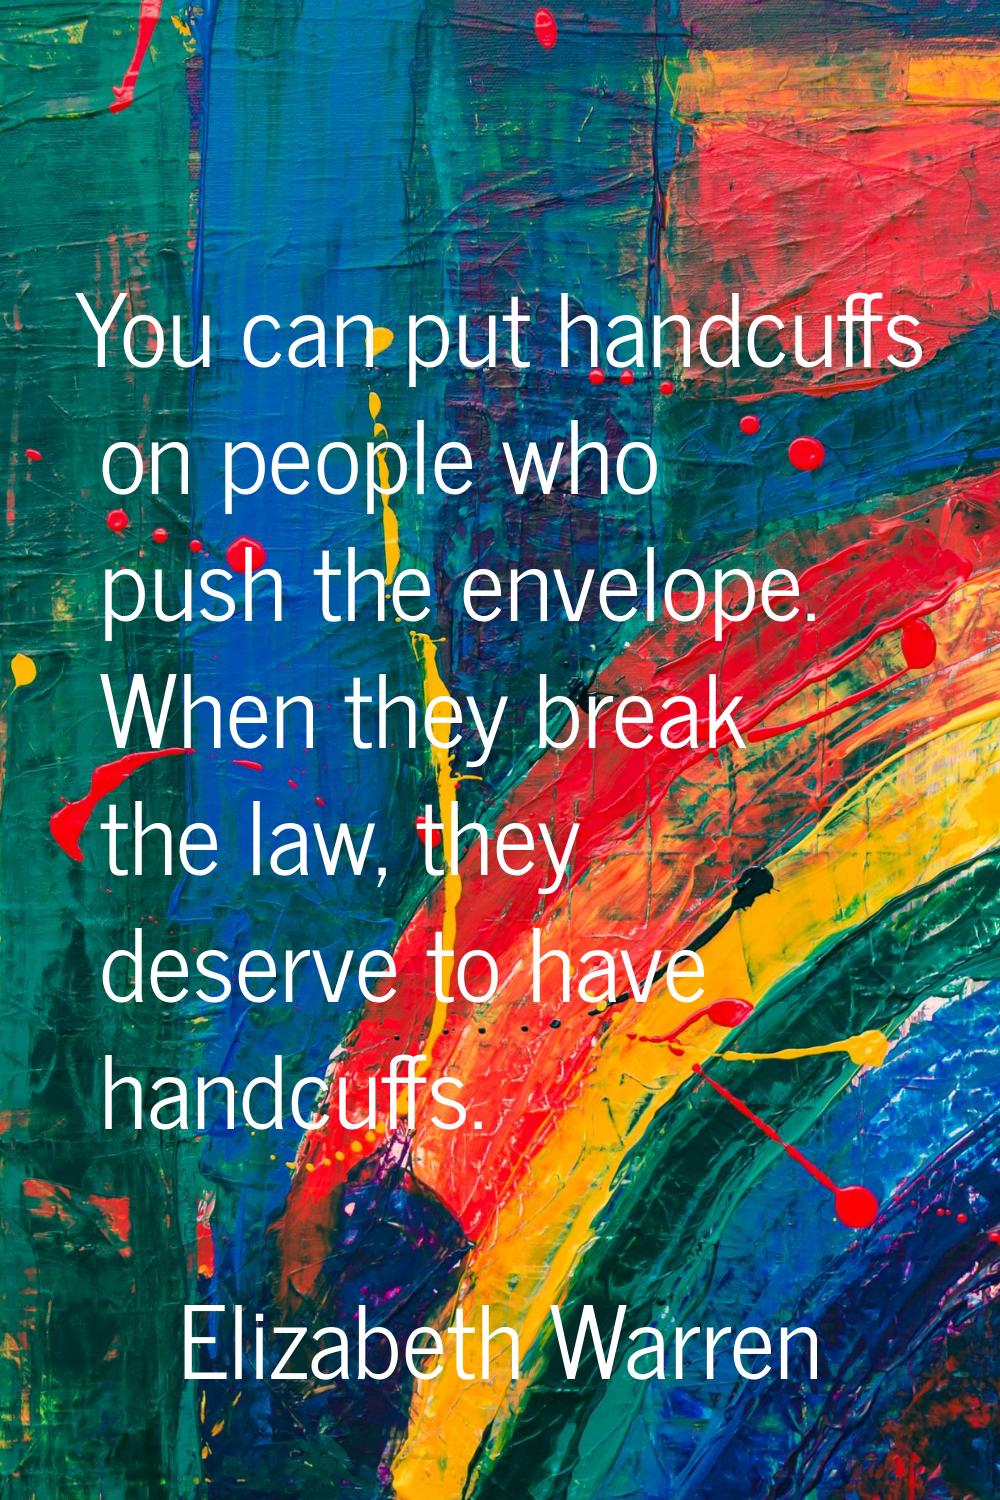 You can put handcuffs on people who push the envelope. When they break the law, they deserve to hav